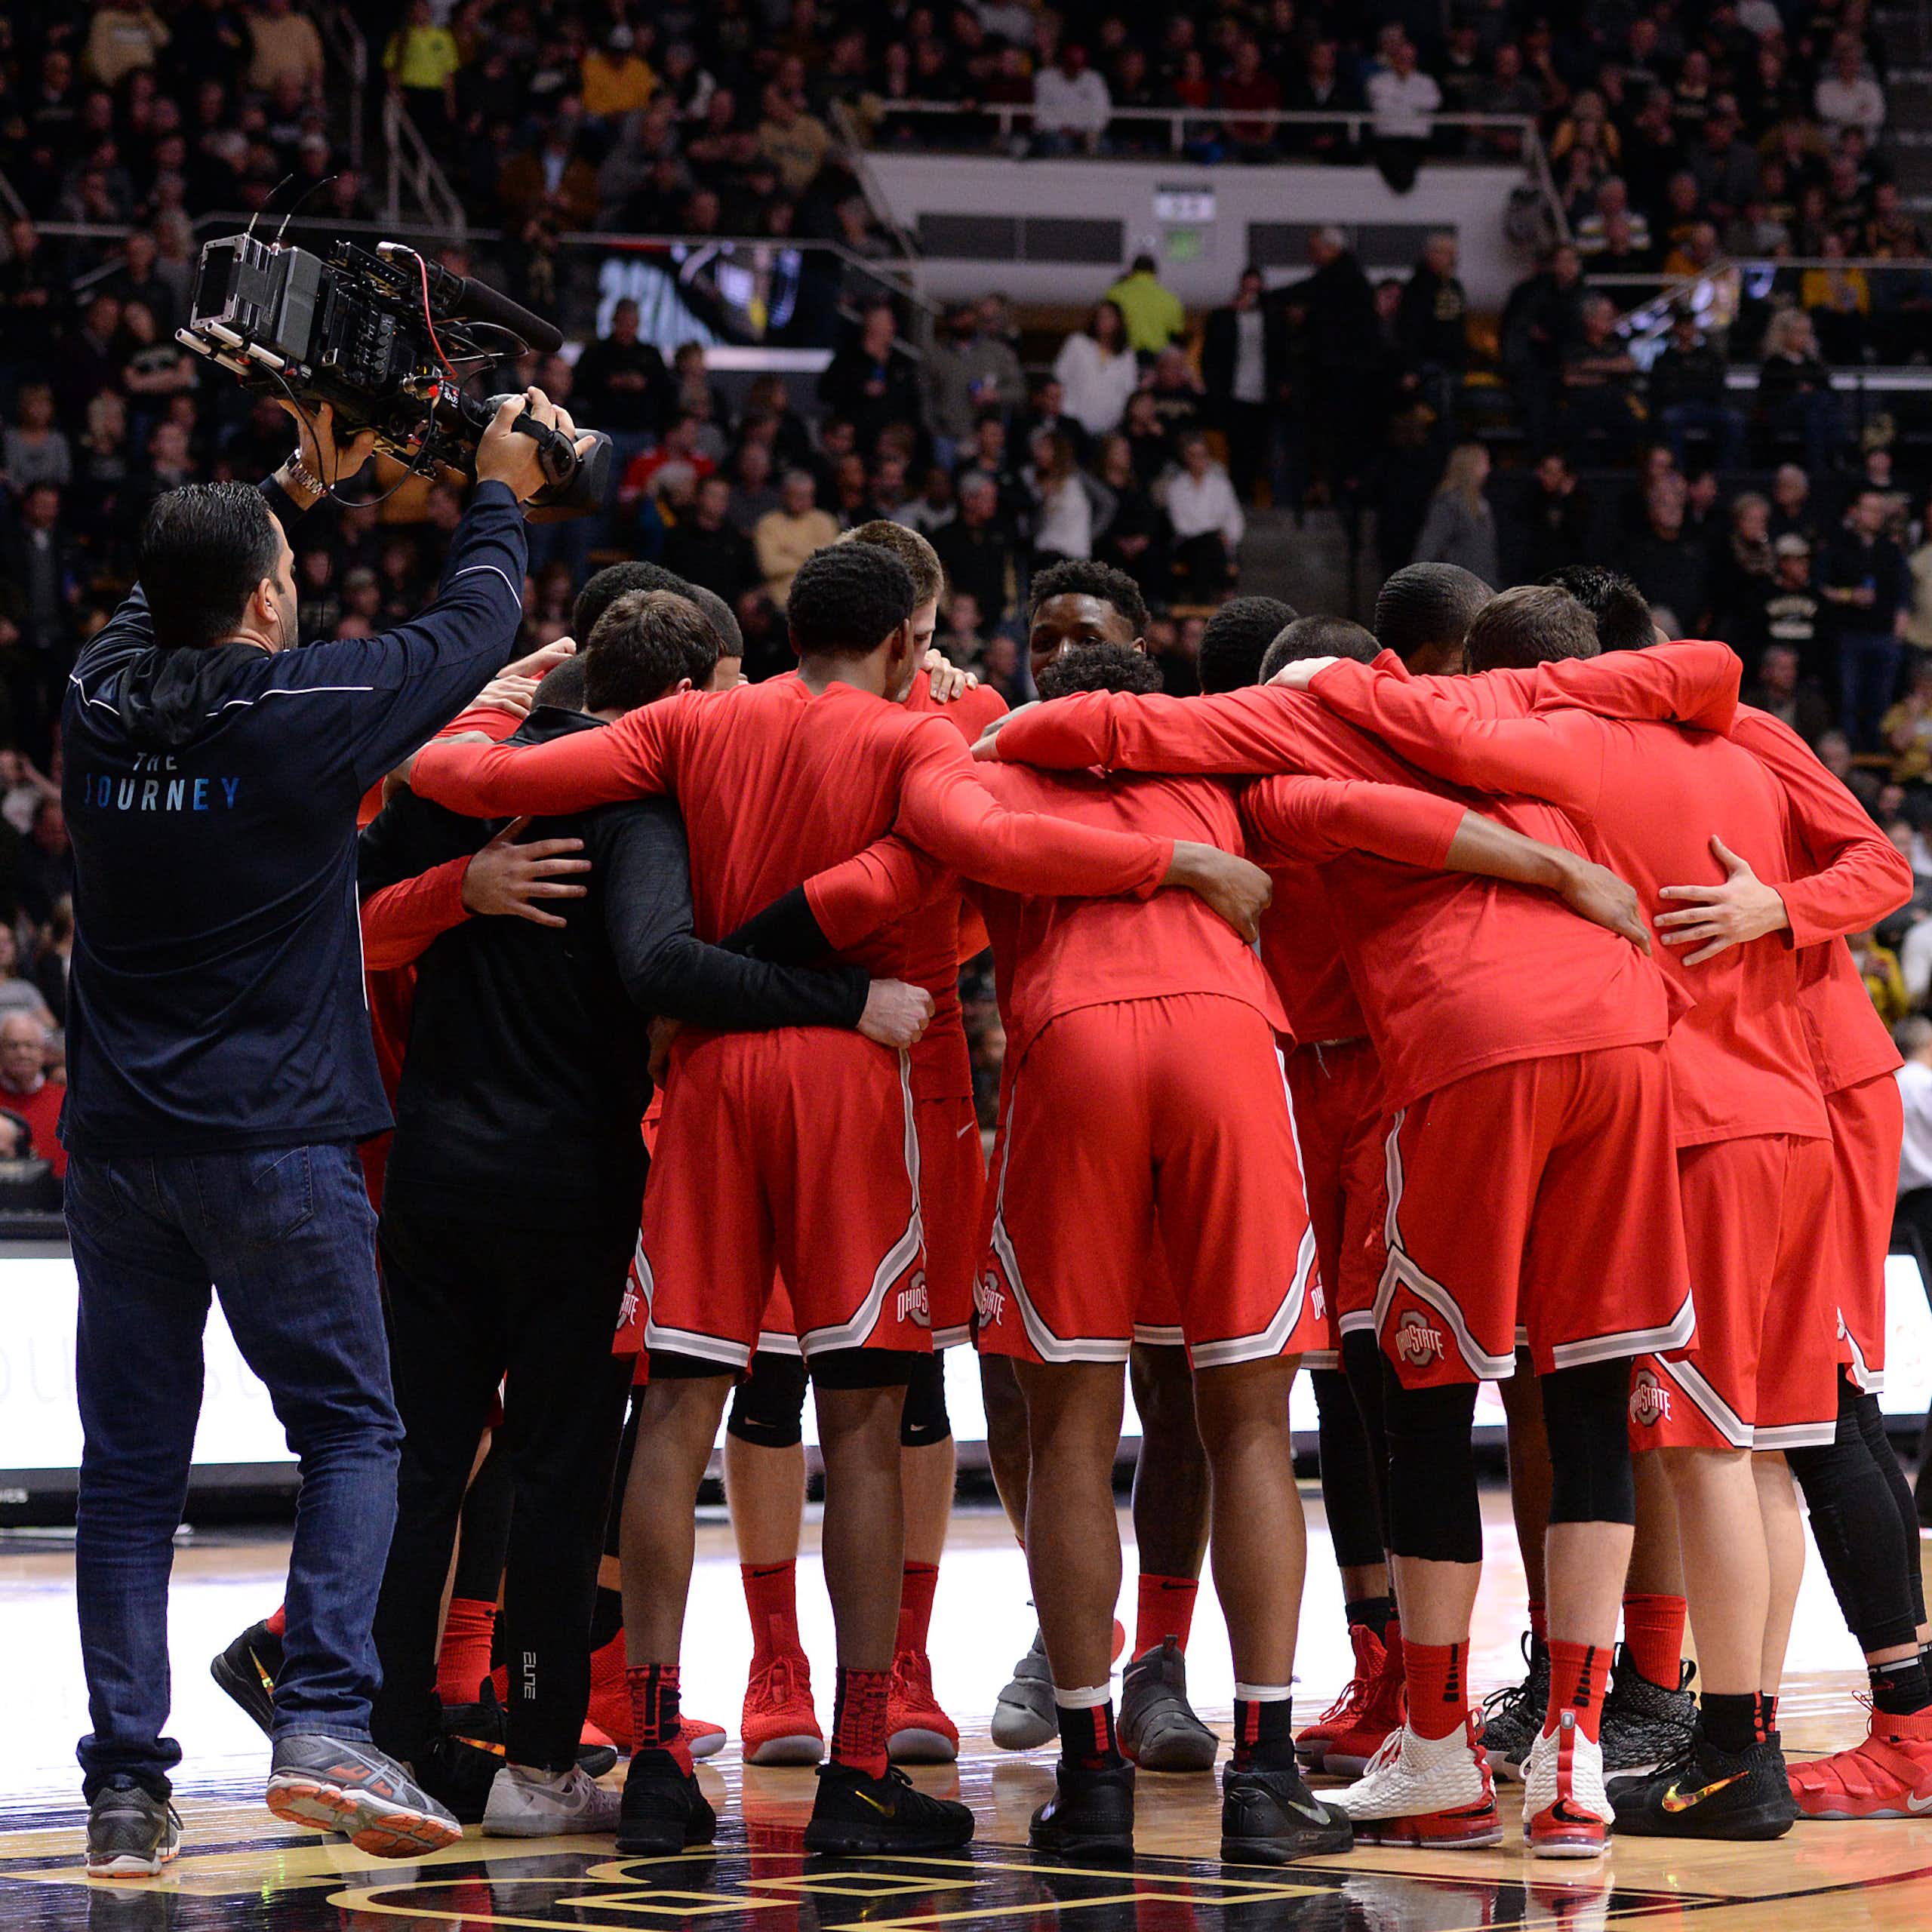 Several college basketball players clad in scarlet are seen on a court; behind them, a cameraman wearing dark, unobtrusive colors angles for a shot.